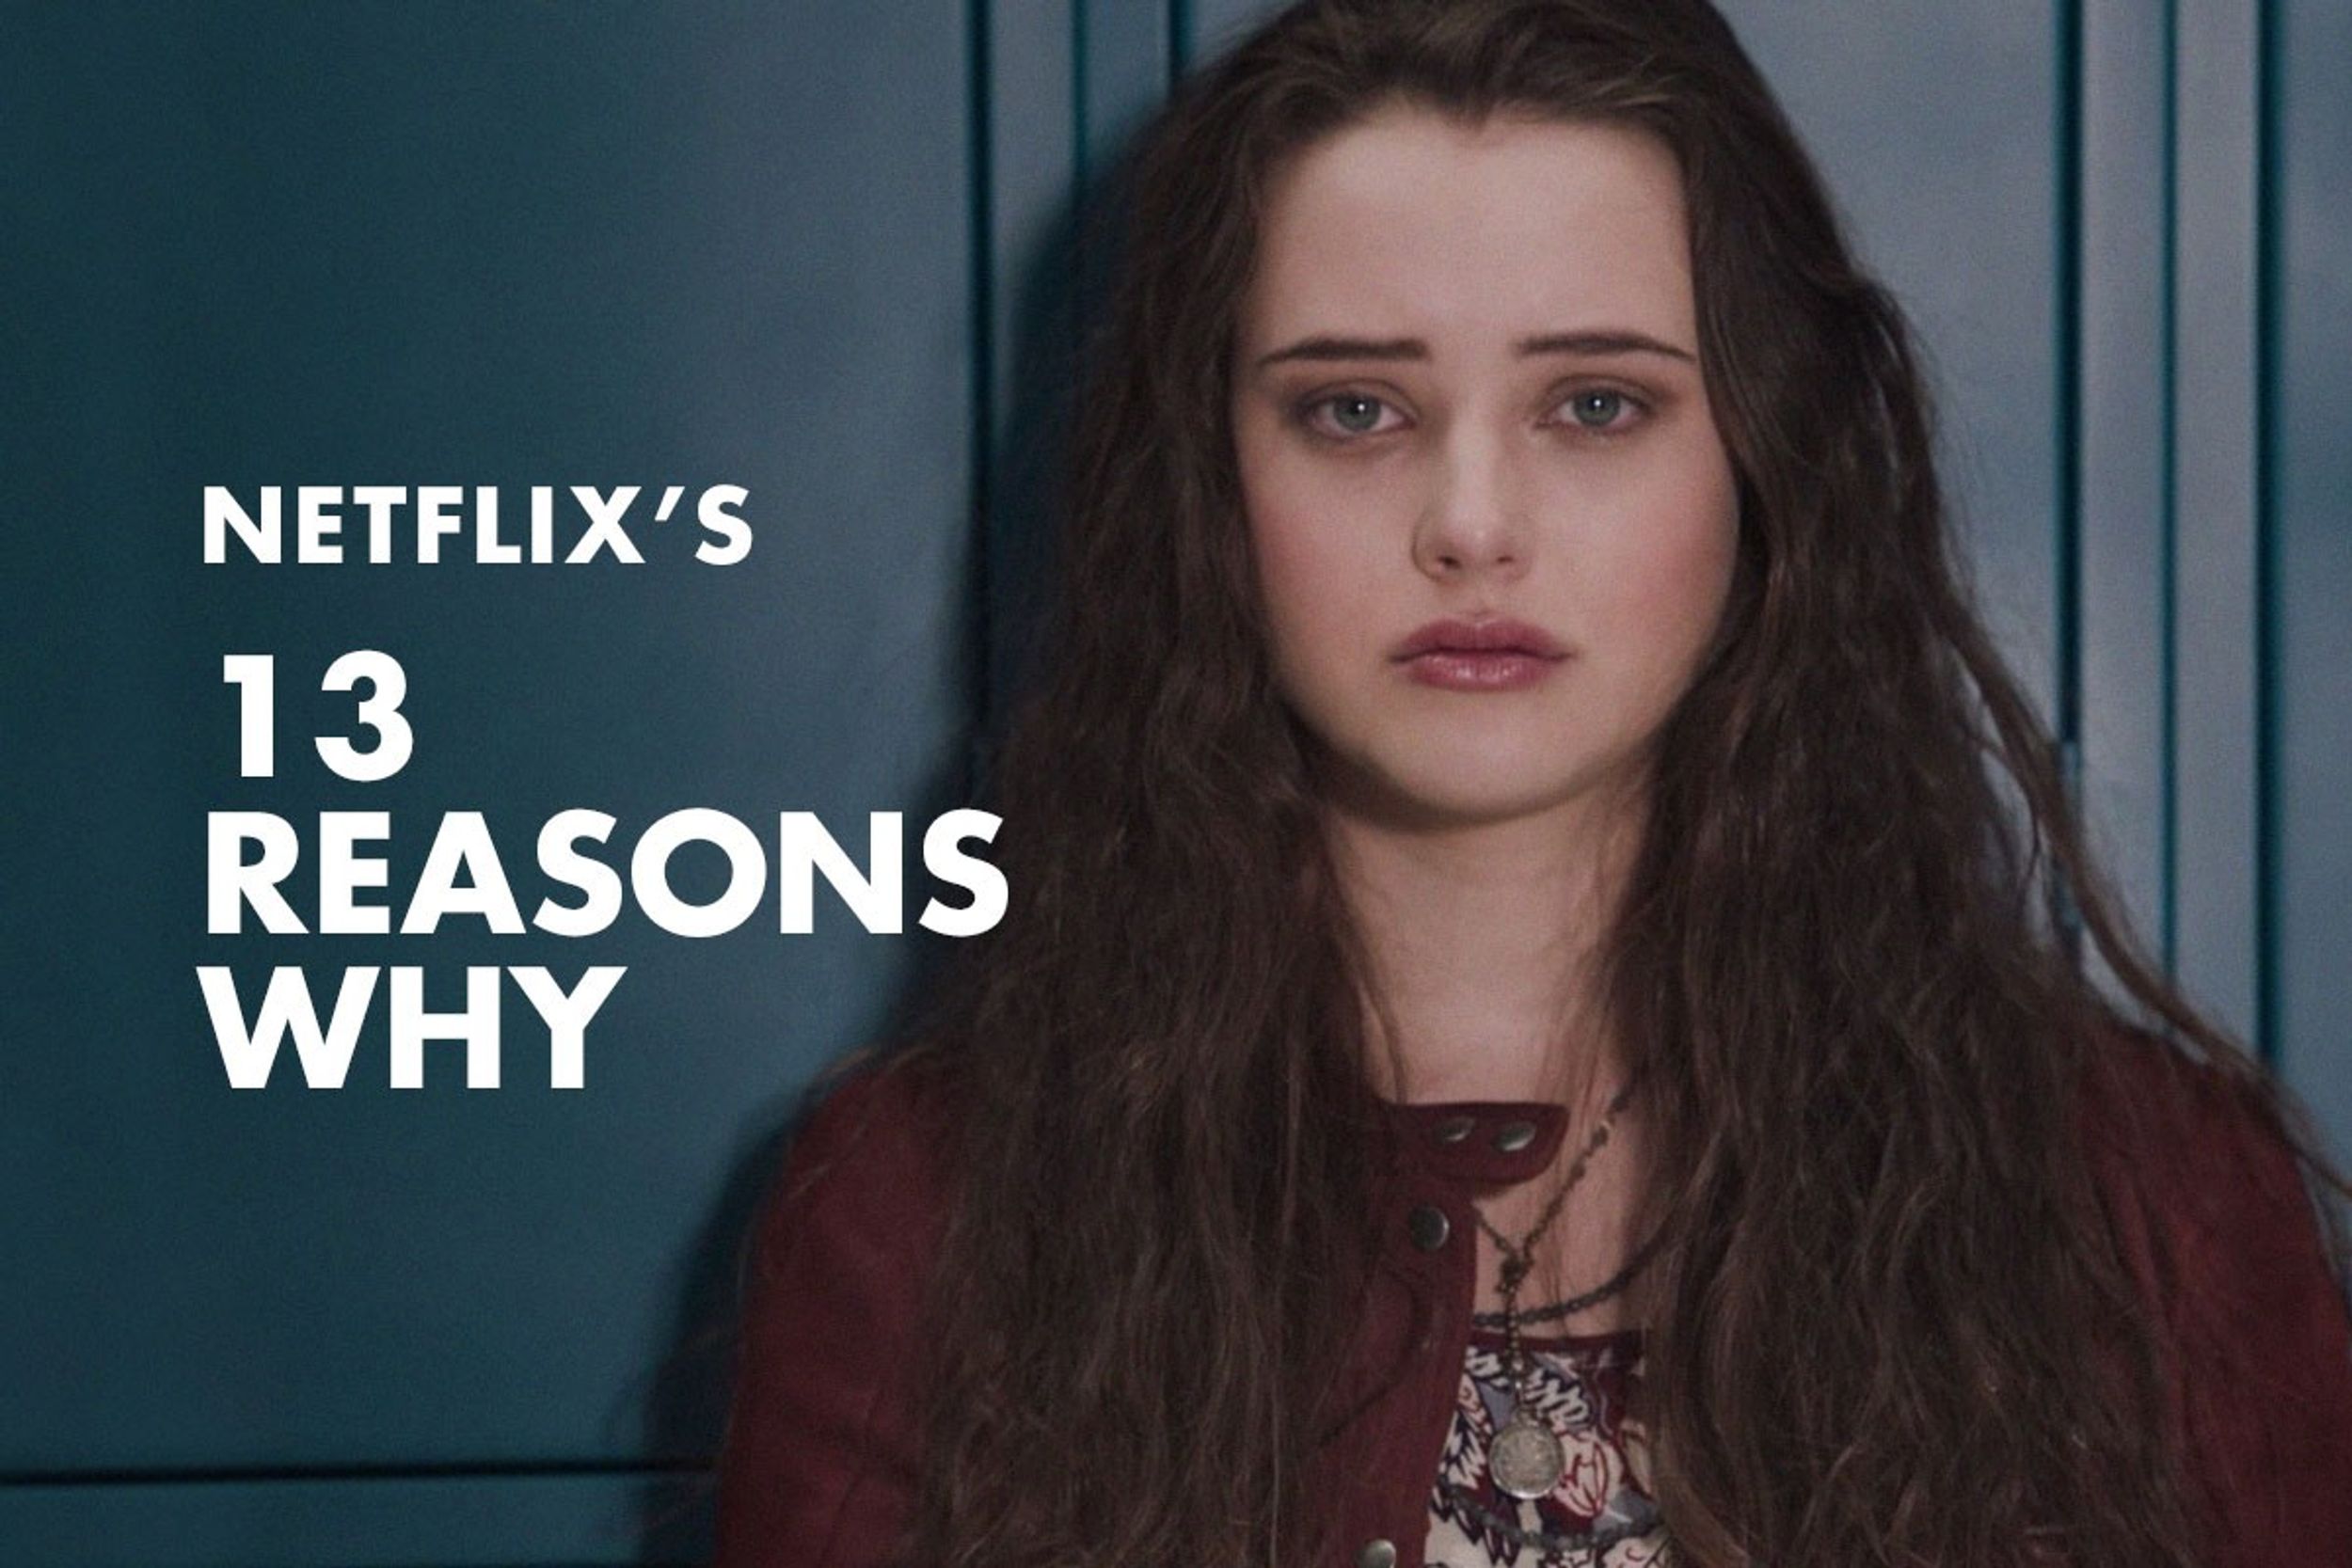 Why I Have Issues With "Thirteen Reasons Why"